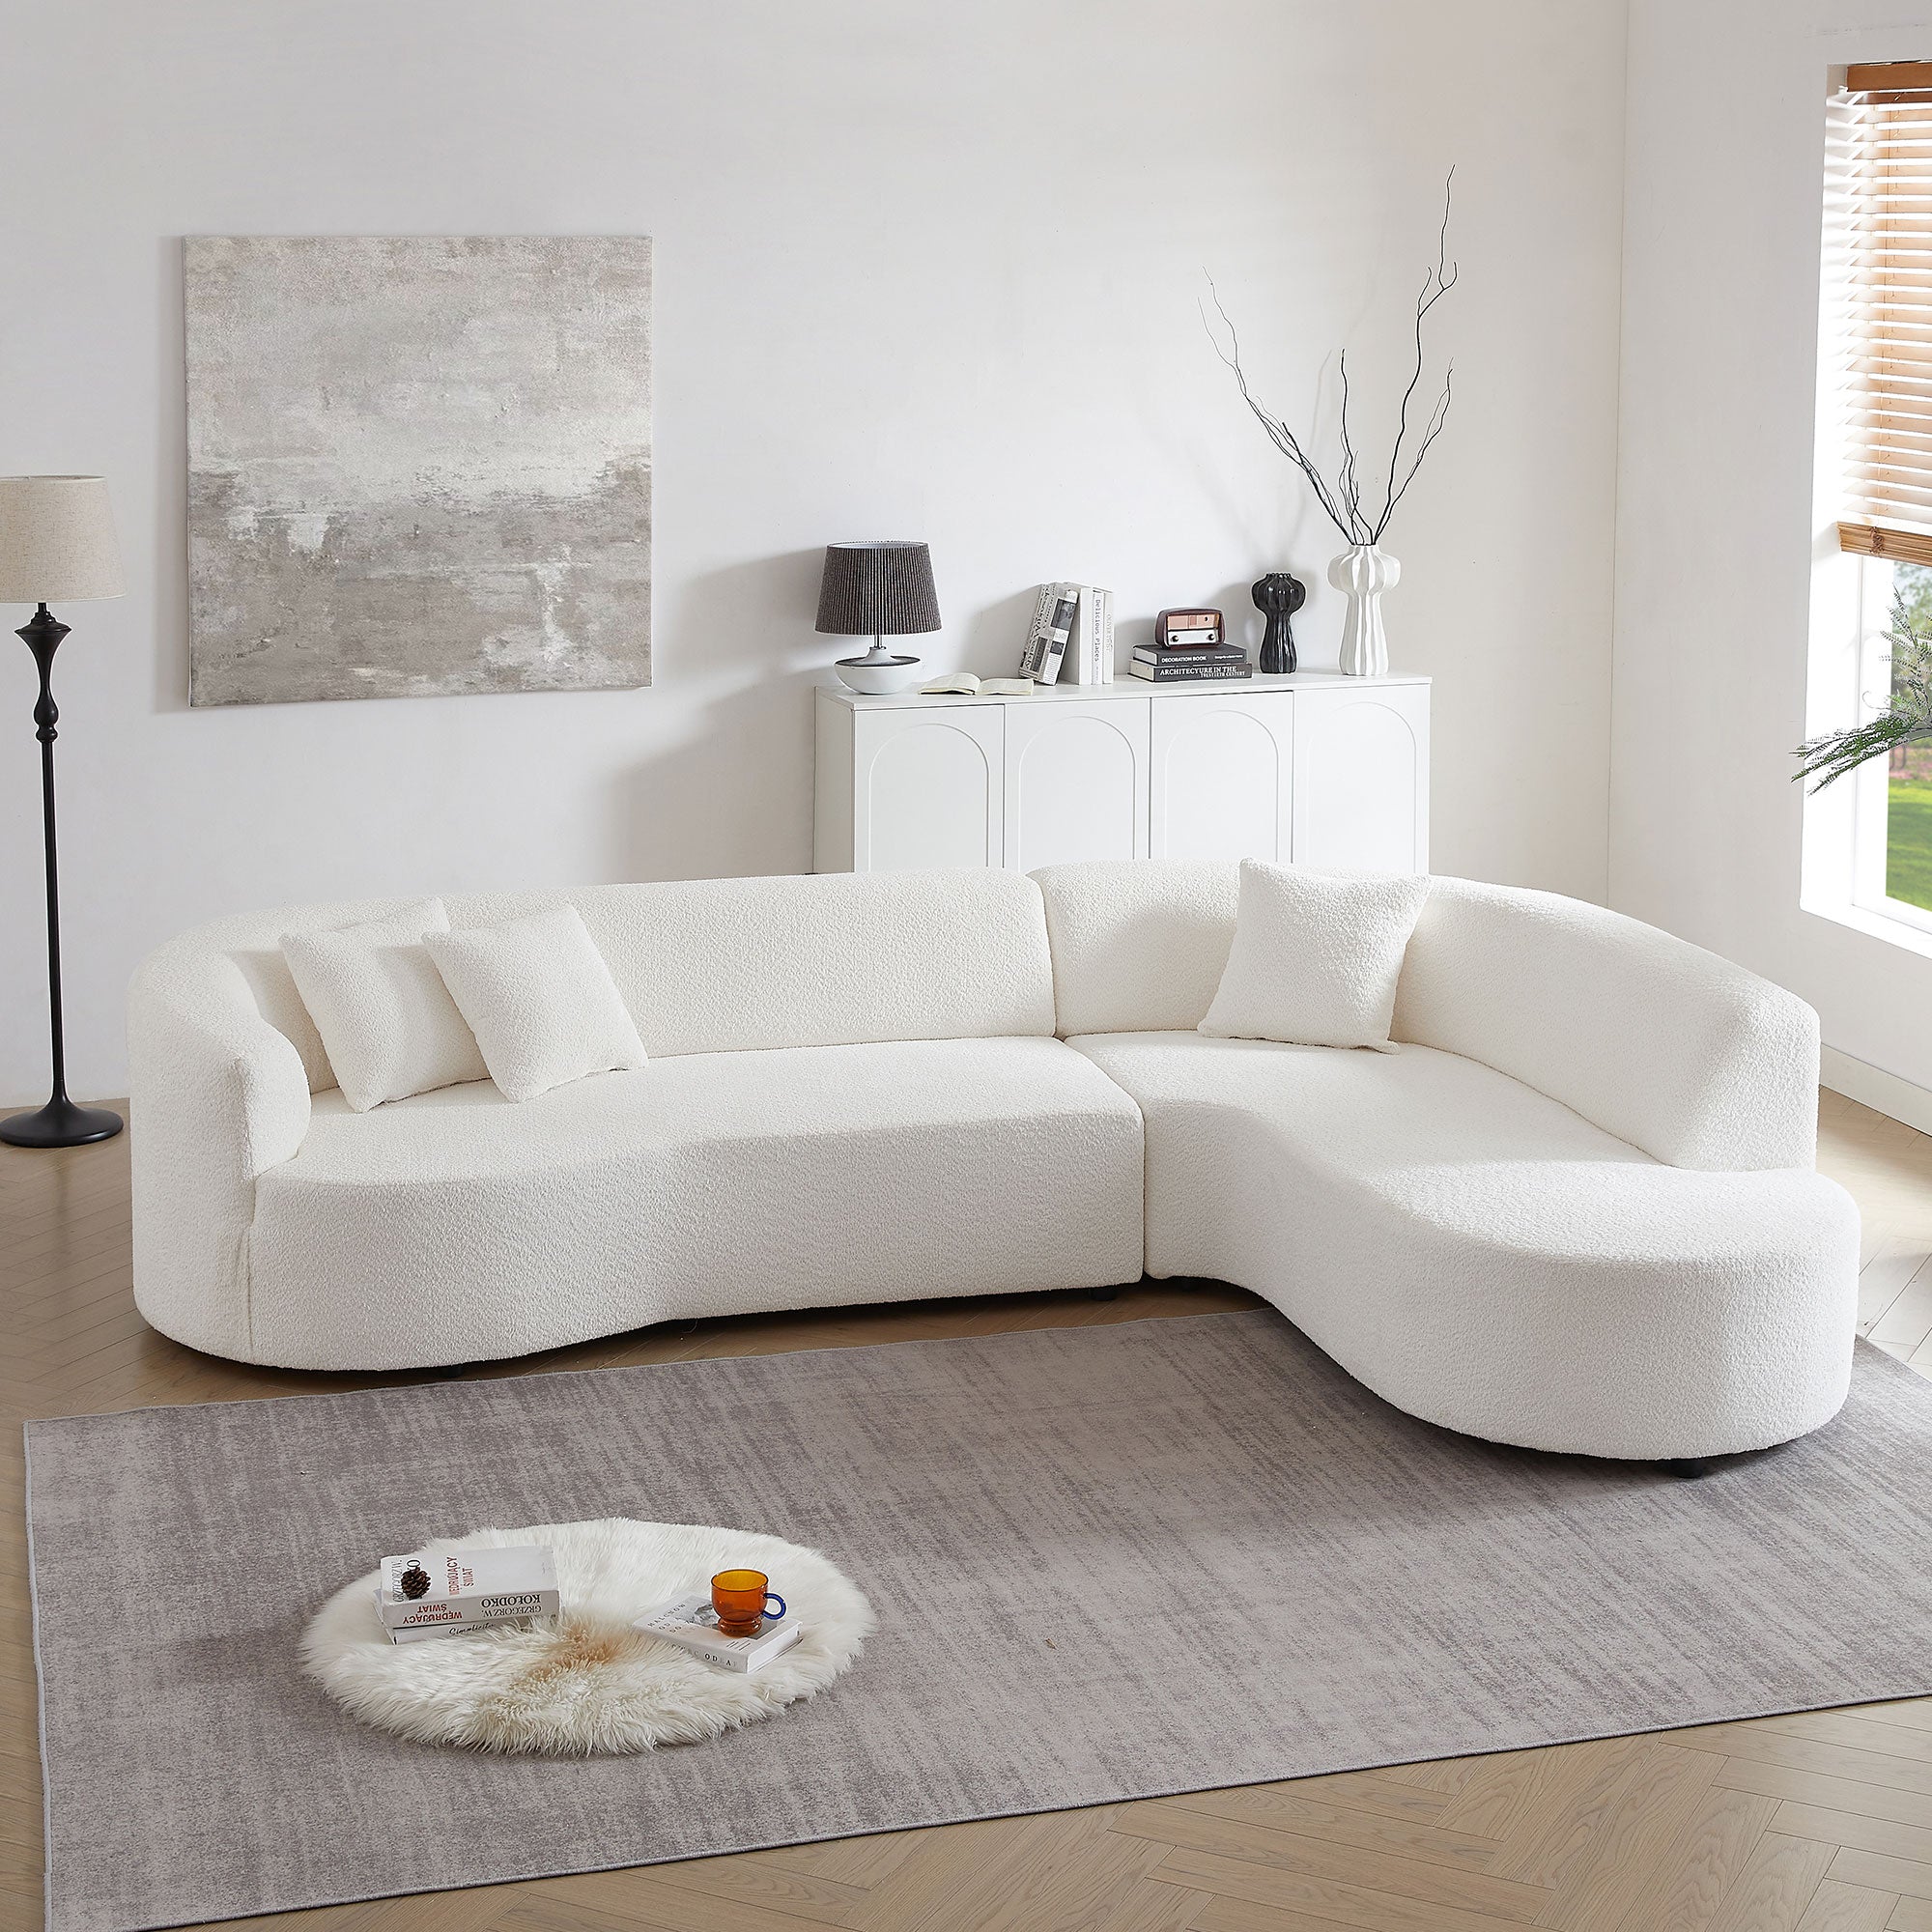 Convertible Modular Sectional Sofa  L-Shaped Corner Comfy Upholstered Couch Living Room Furniture Sets